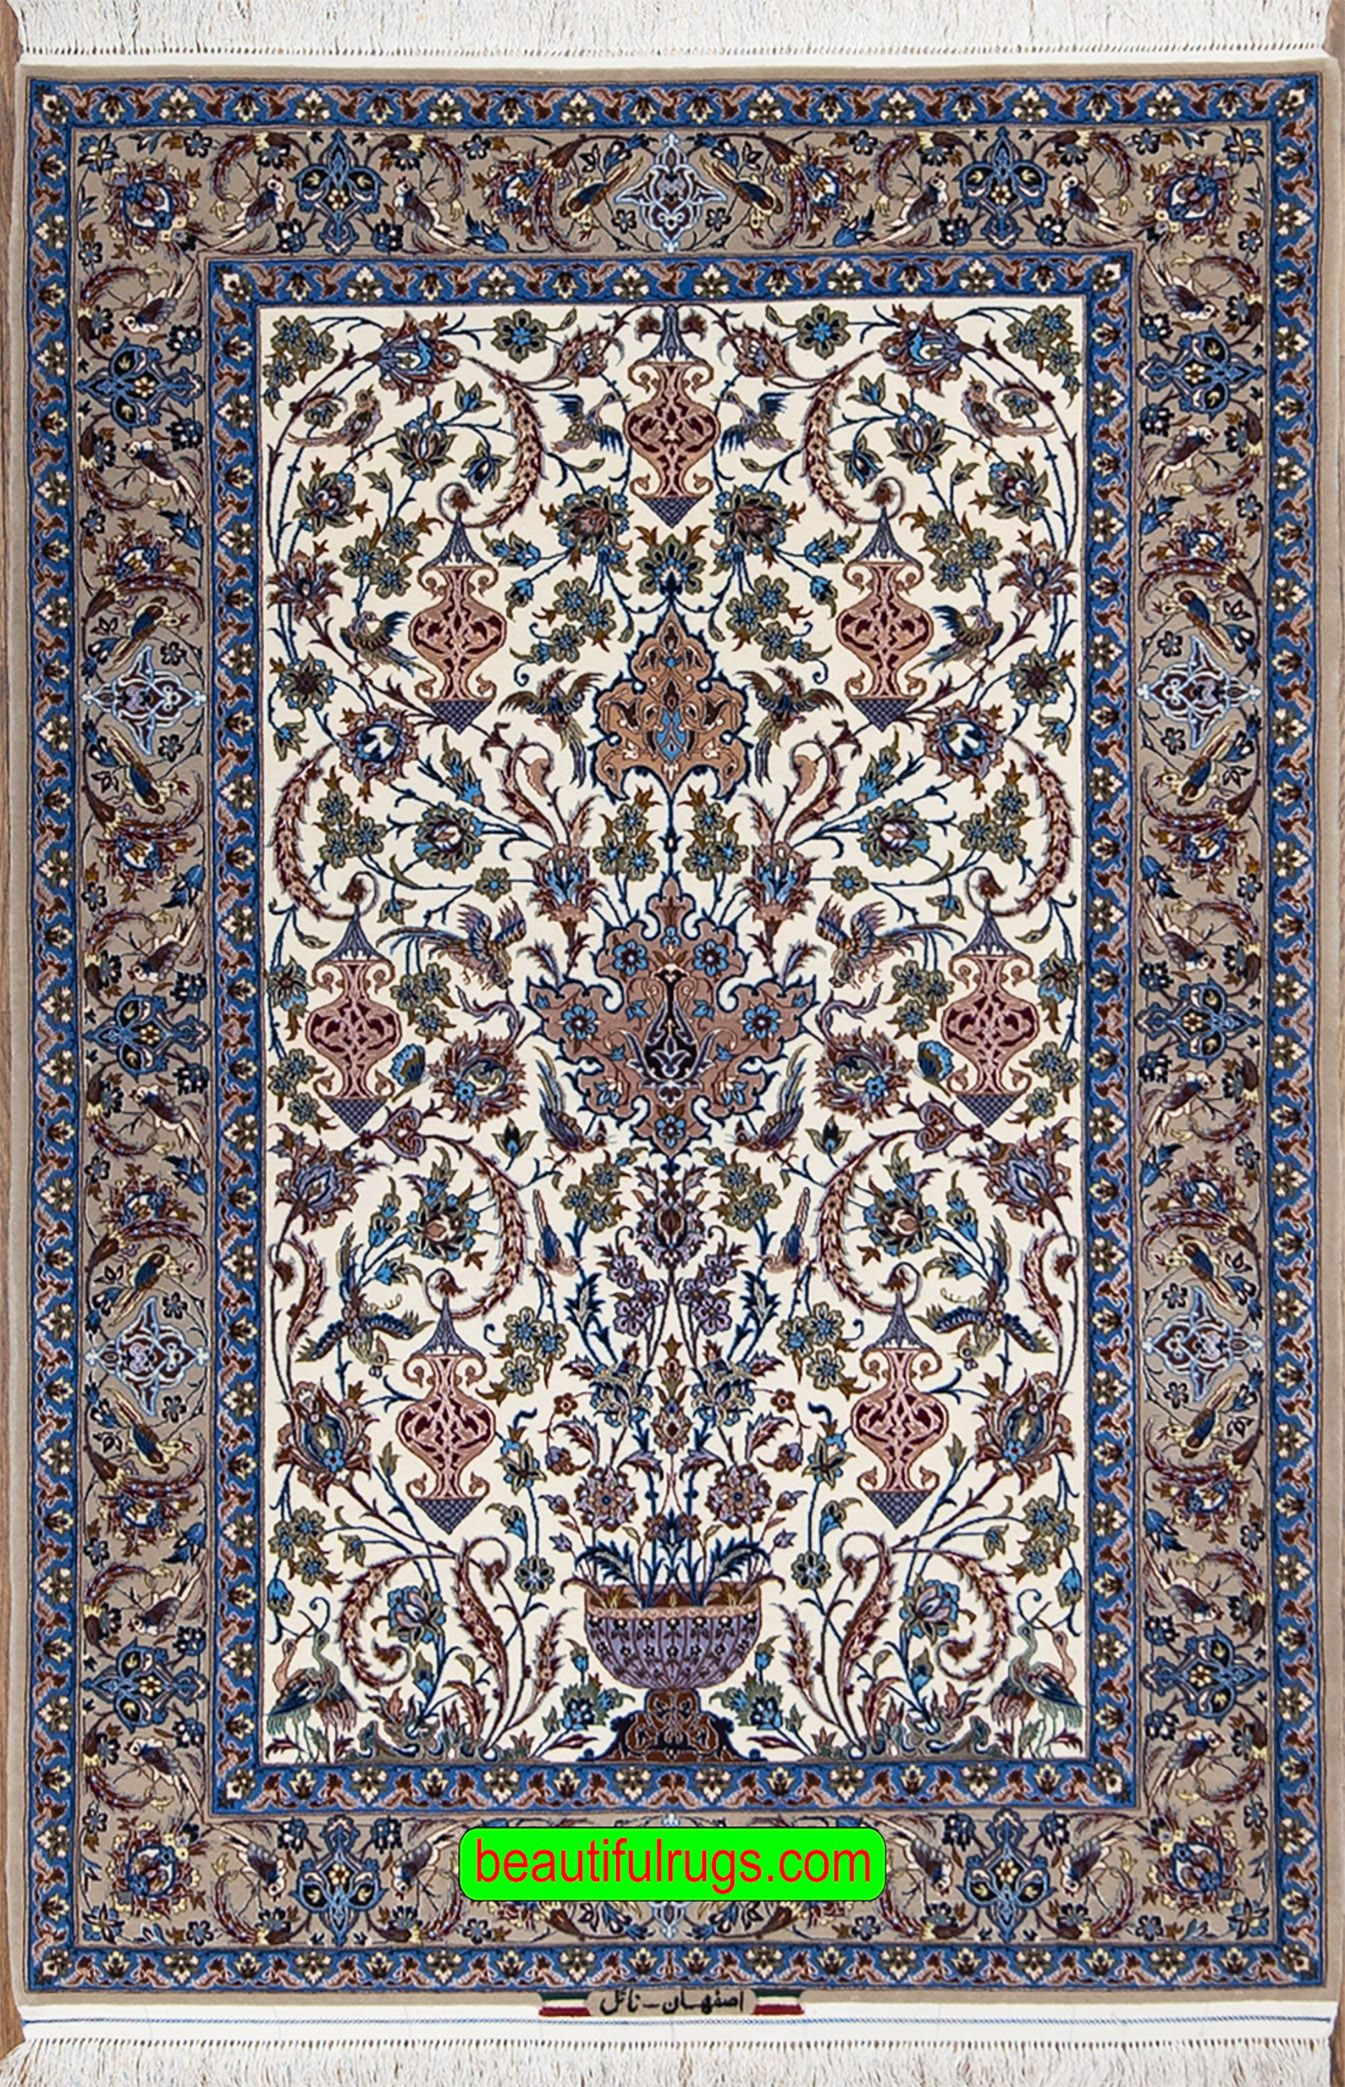 High quality Persian Isfahan rug, Kork wool and silk rug in beige color. Size 3.9x4.6.